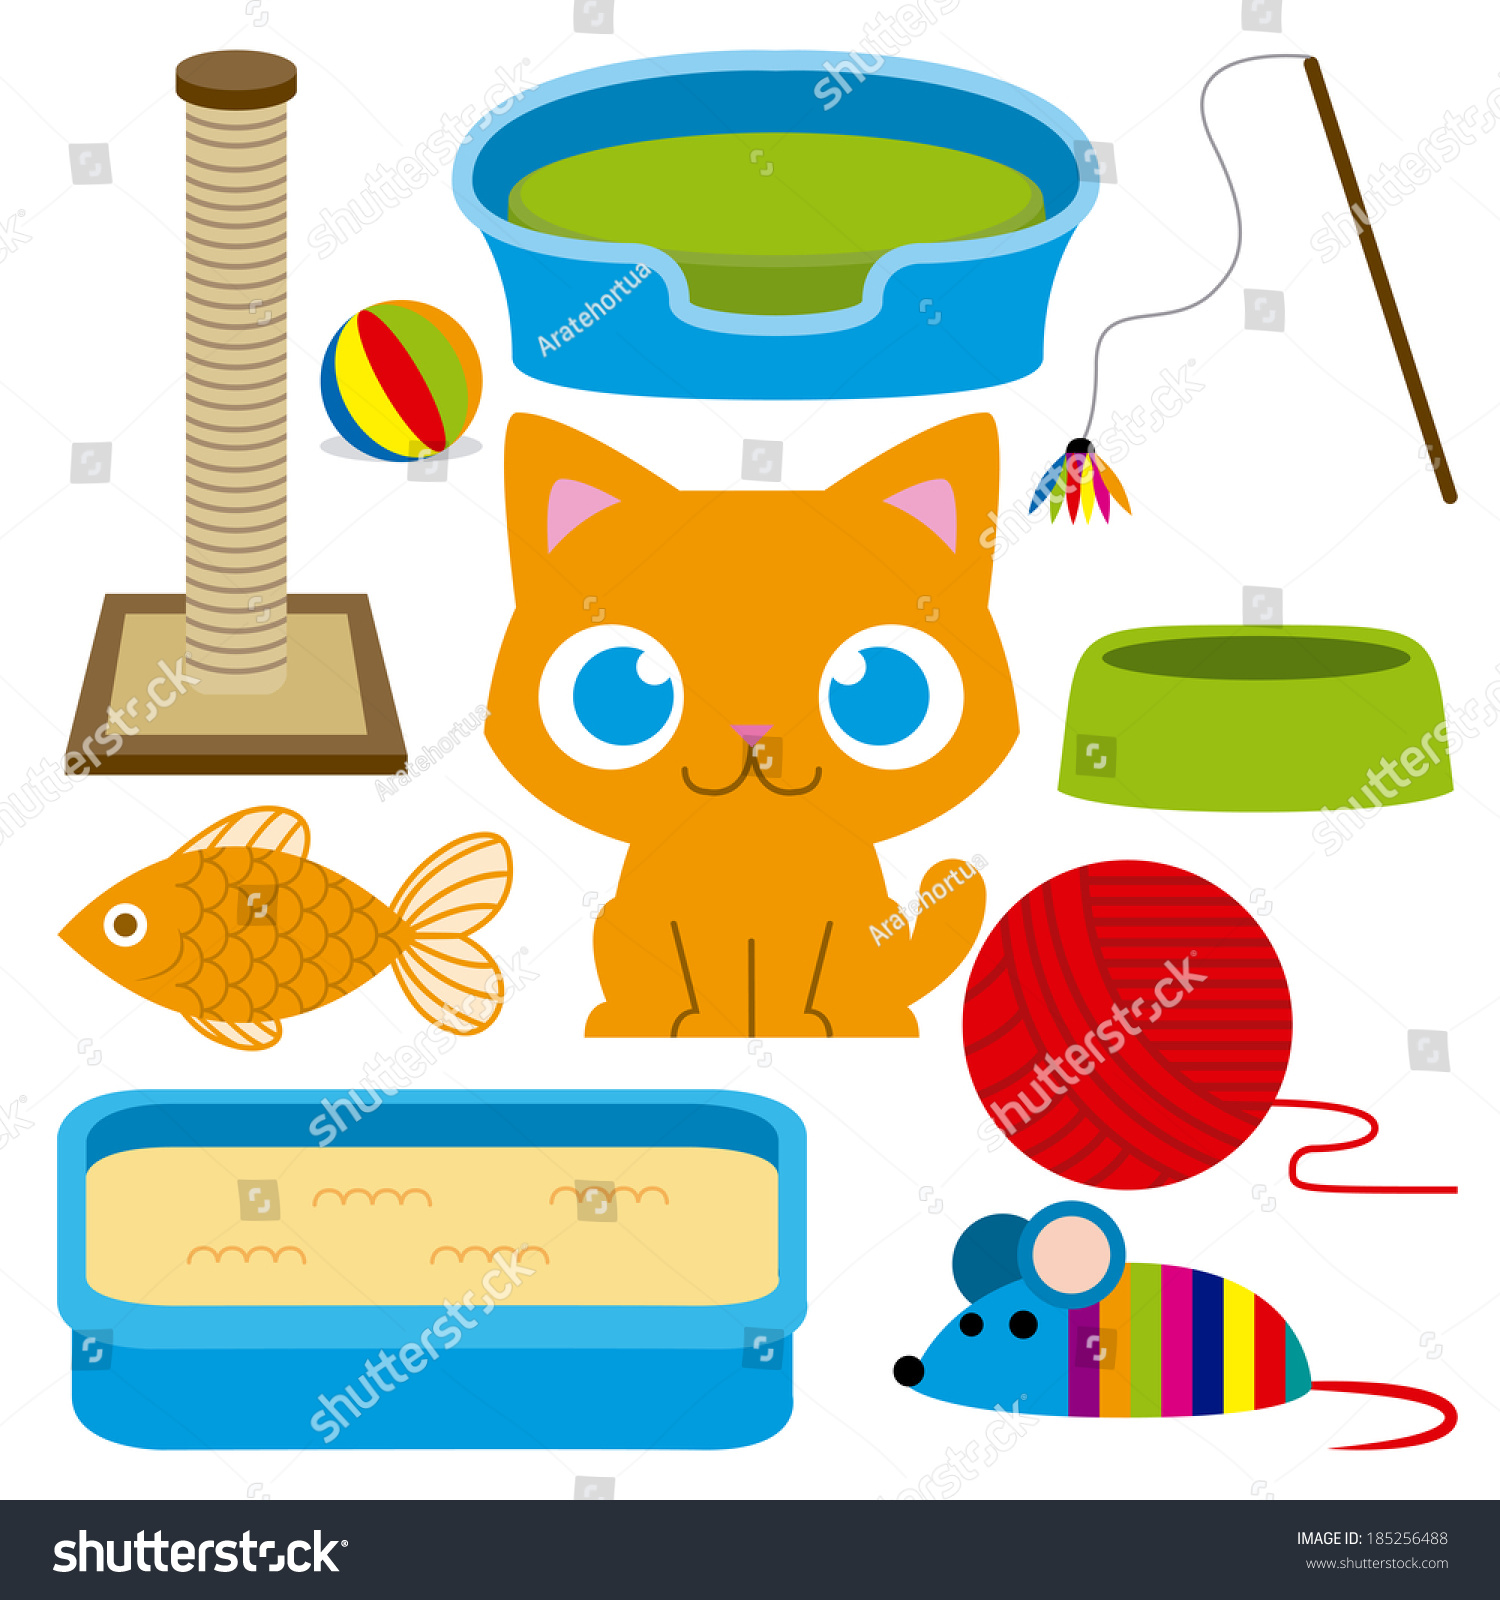 cat bed clipart - photo #28